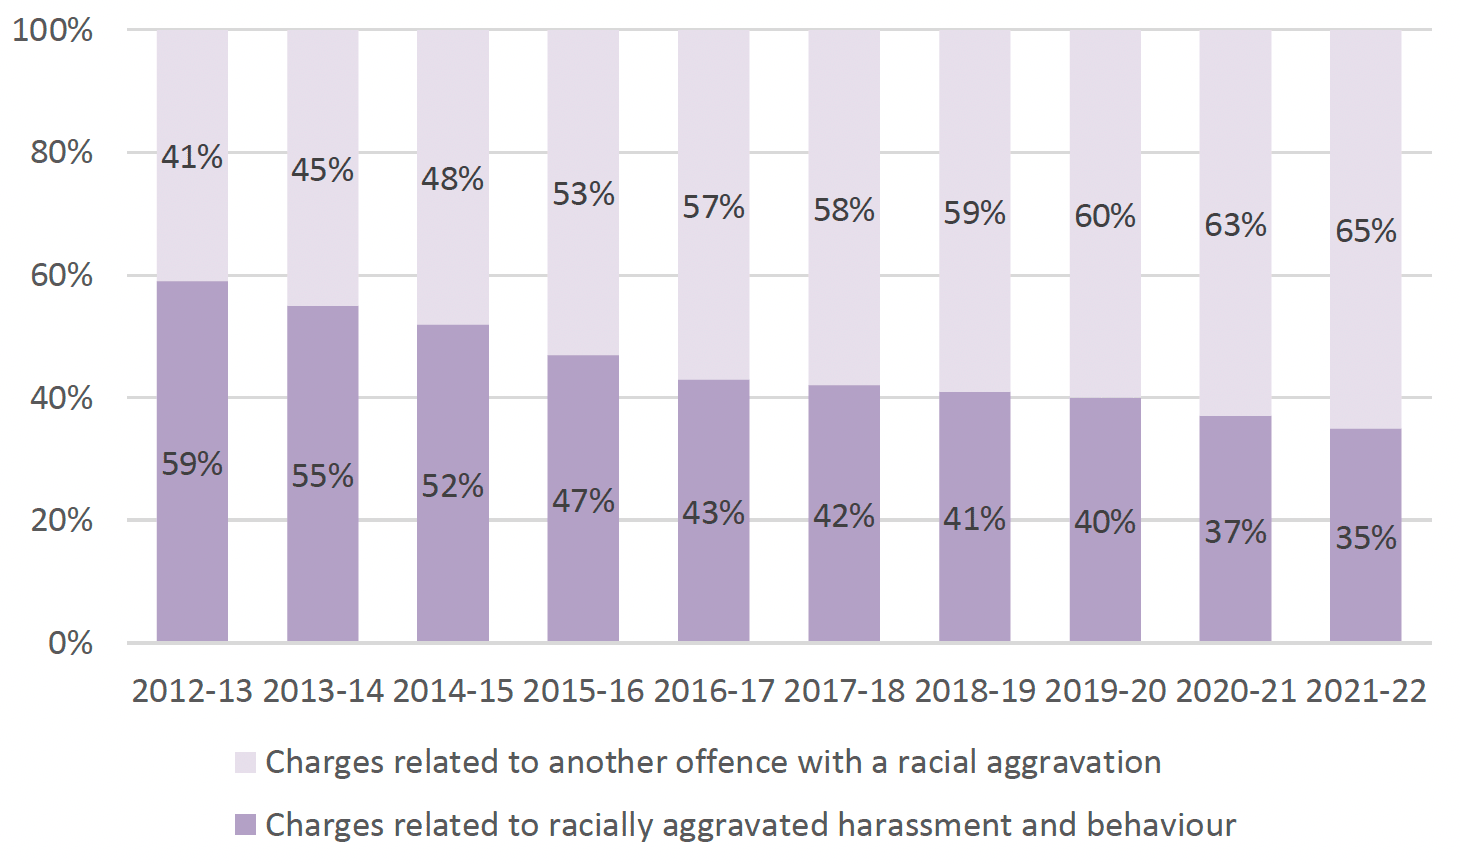 A bar chart showing that the proportion of charges directly related to racially aggravated harassment and behaviour has fallen over recent years.